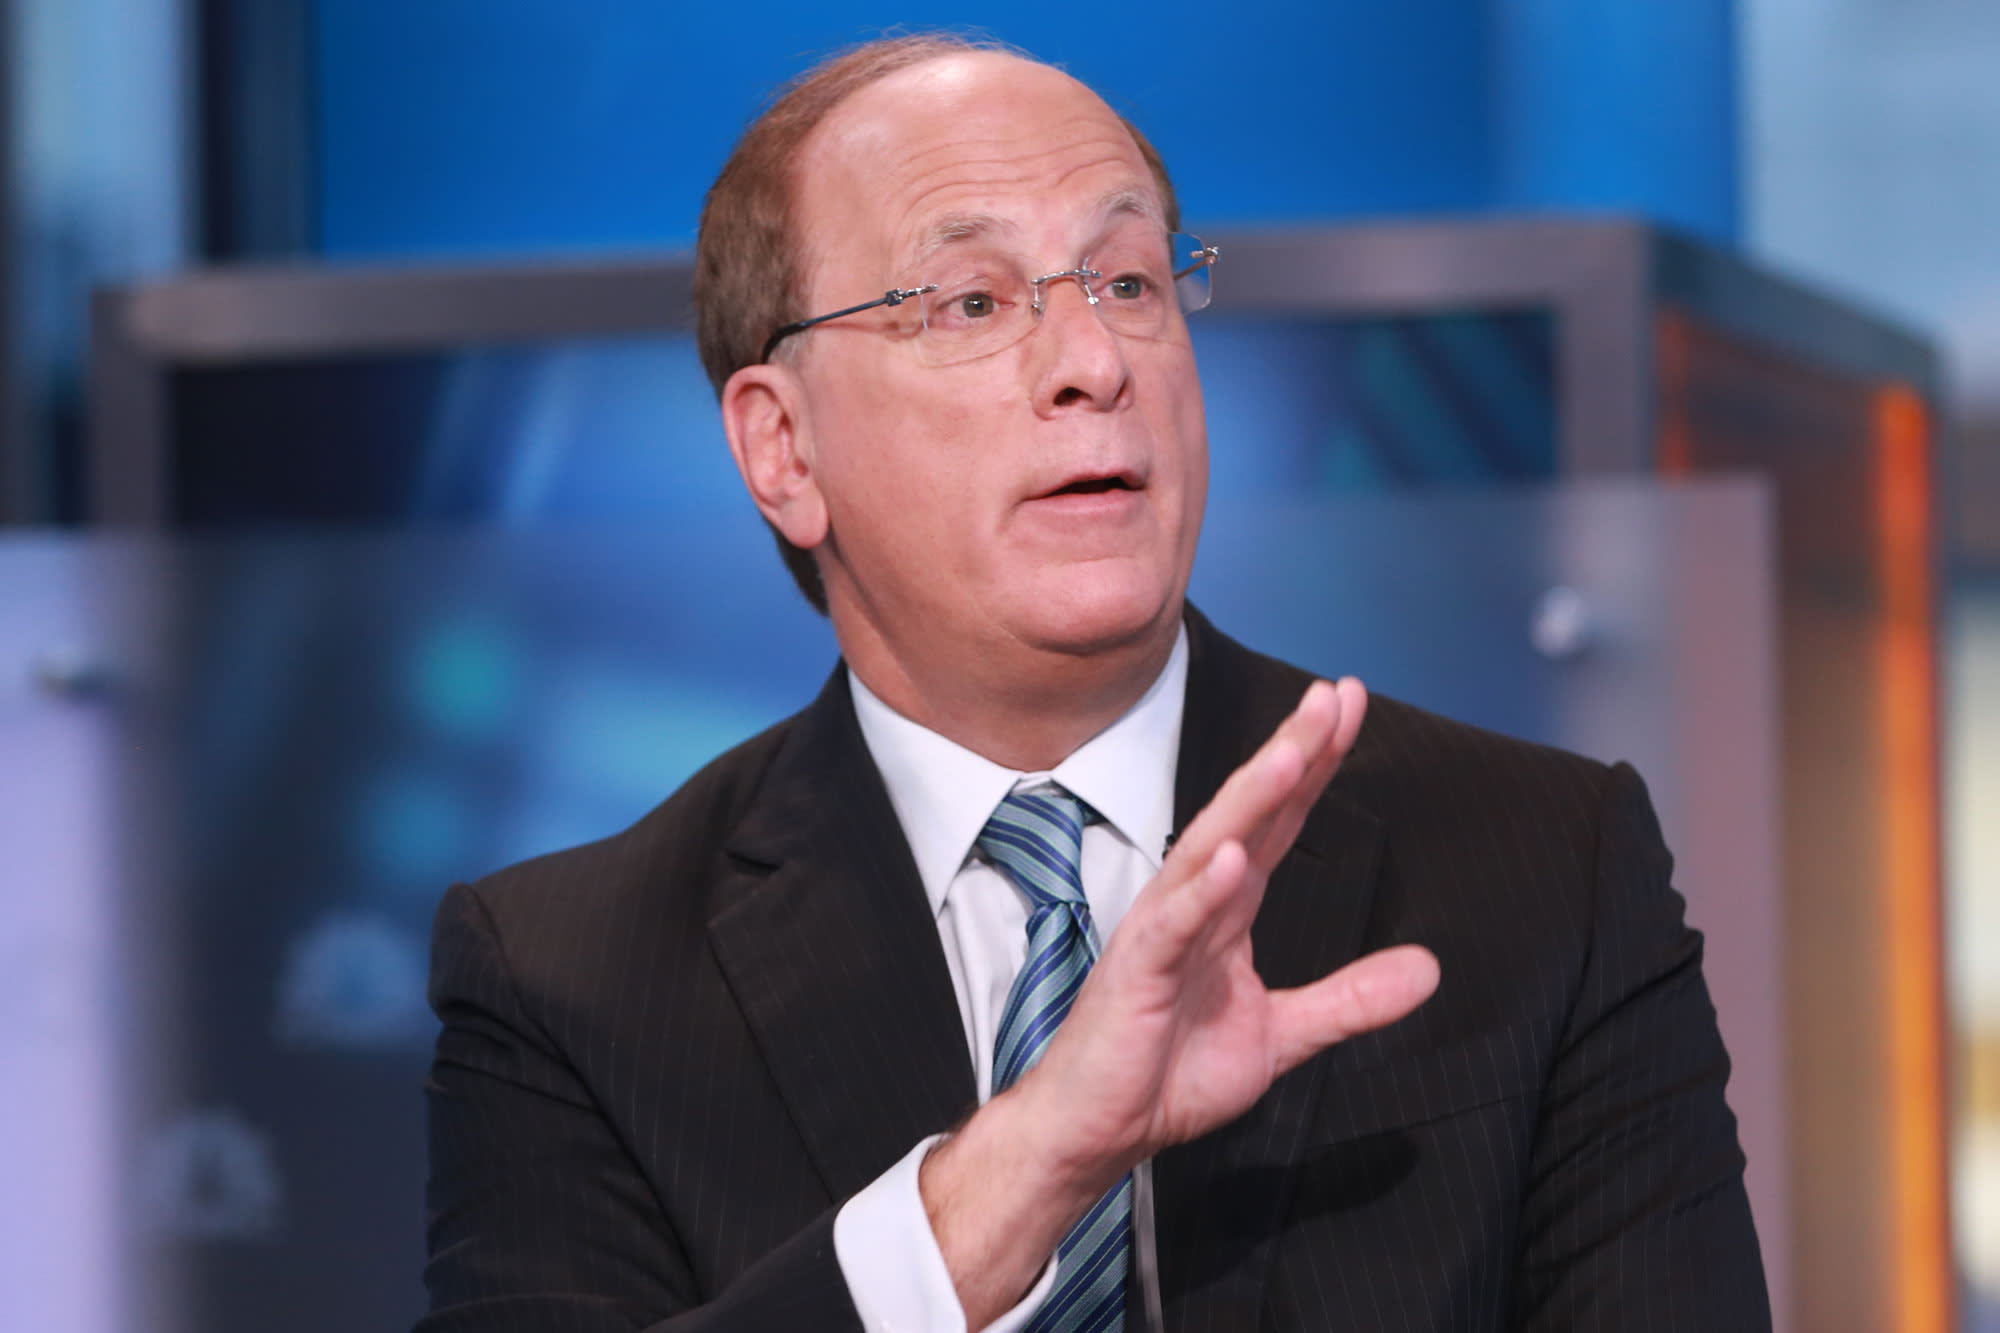 BlackRock CEO Larry Fink says he is “incredibly optimistic” in the stock market